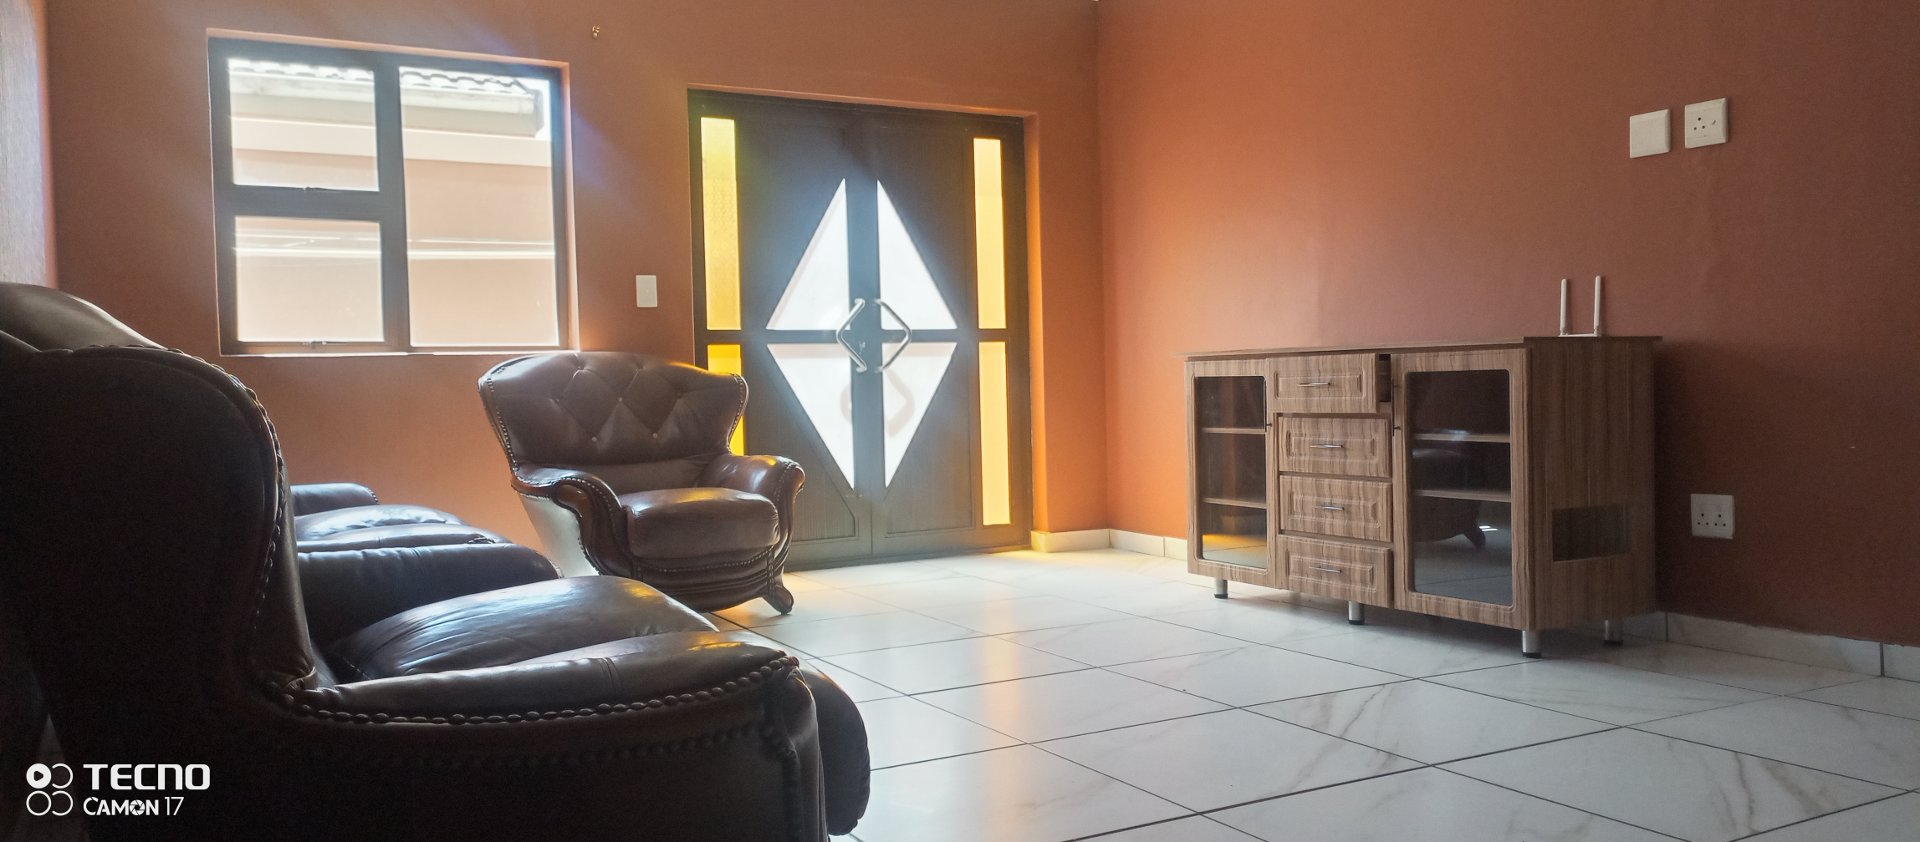 7 Bedroom Property for Sale in Electric City Western Cape